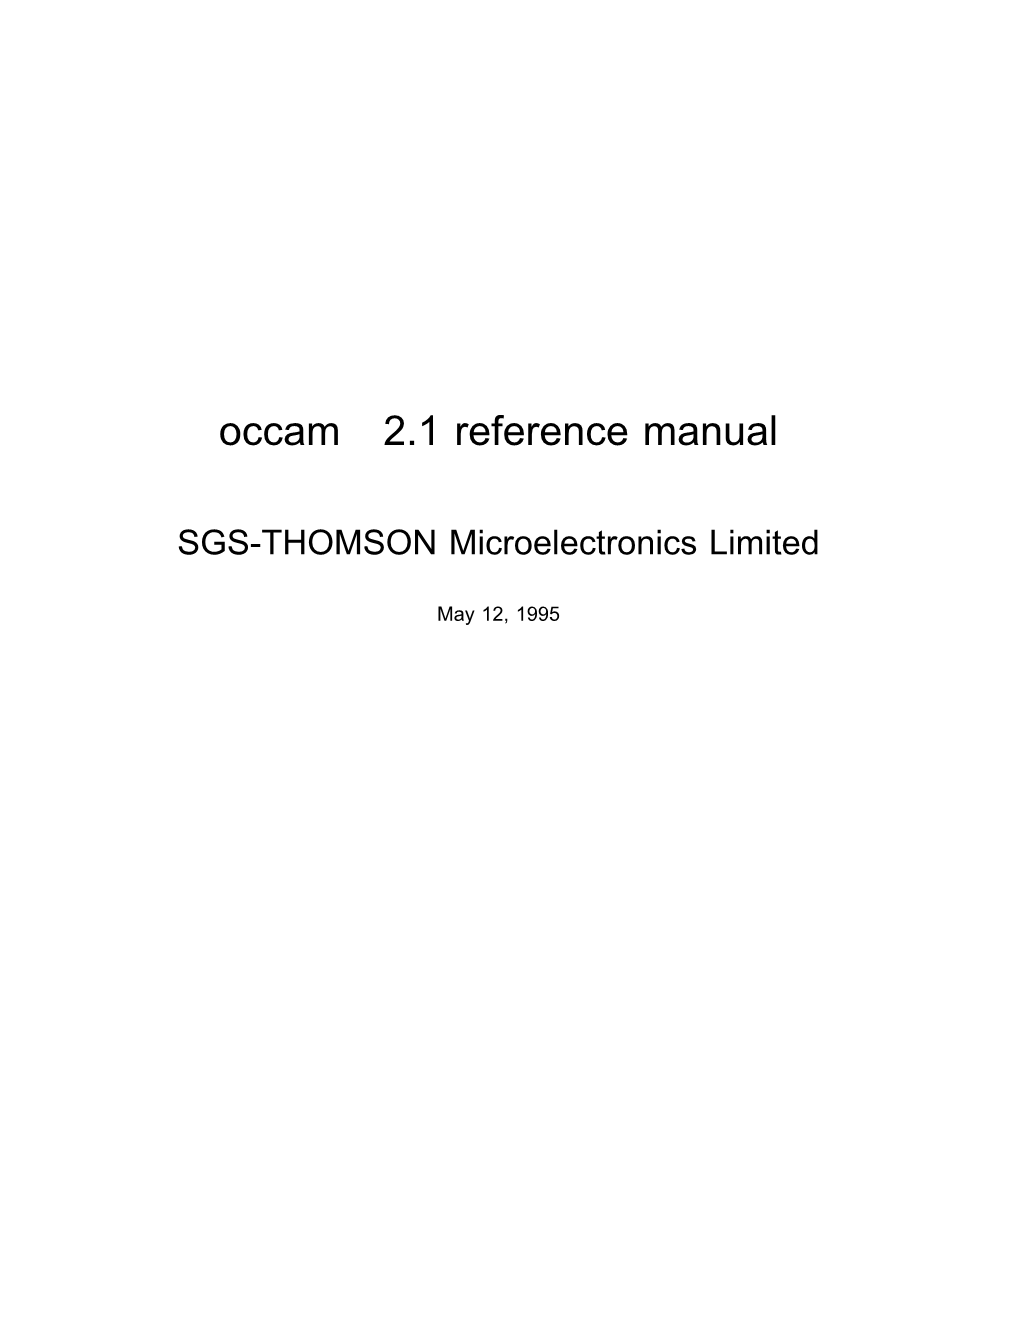 Occam 2.1 Reference Manual